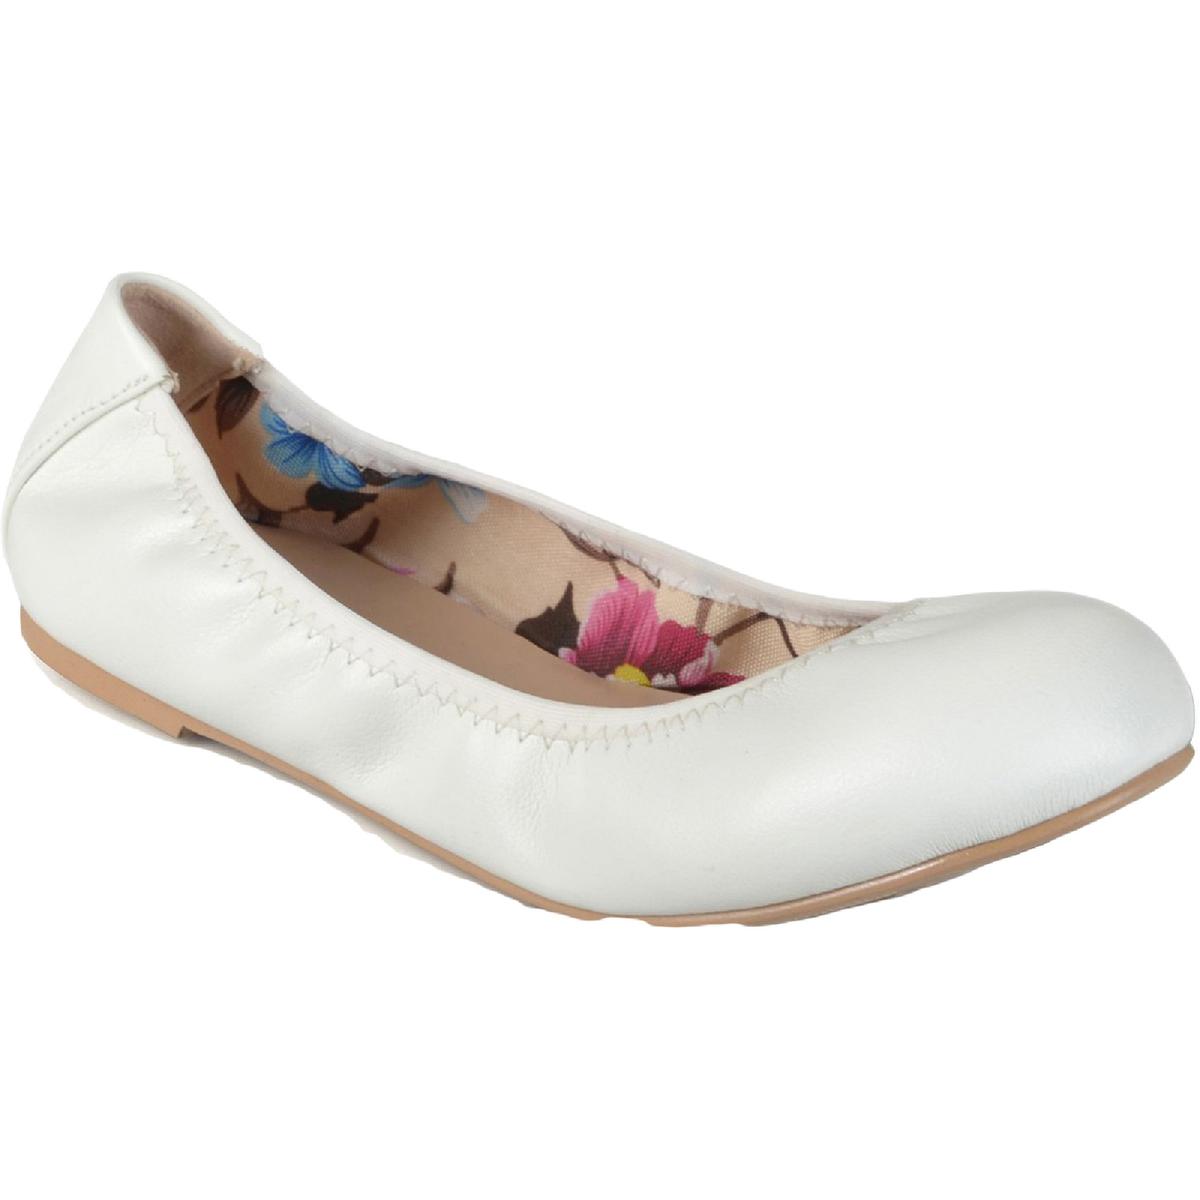 Journee Collection Lindy Womens Faux Leather Round Toe Ballet Flats